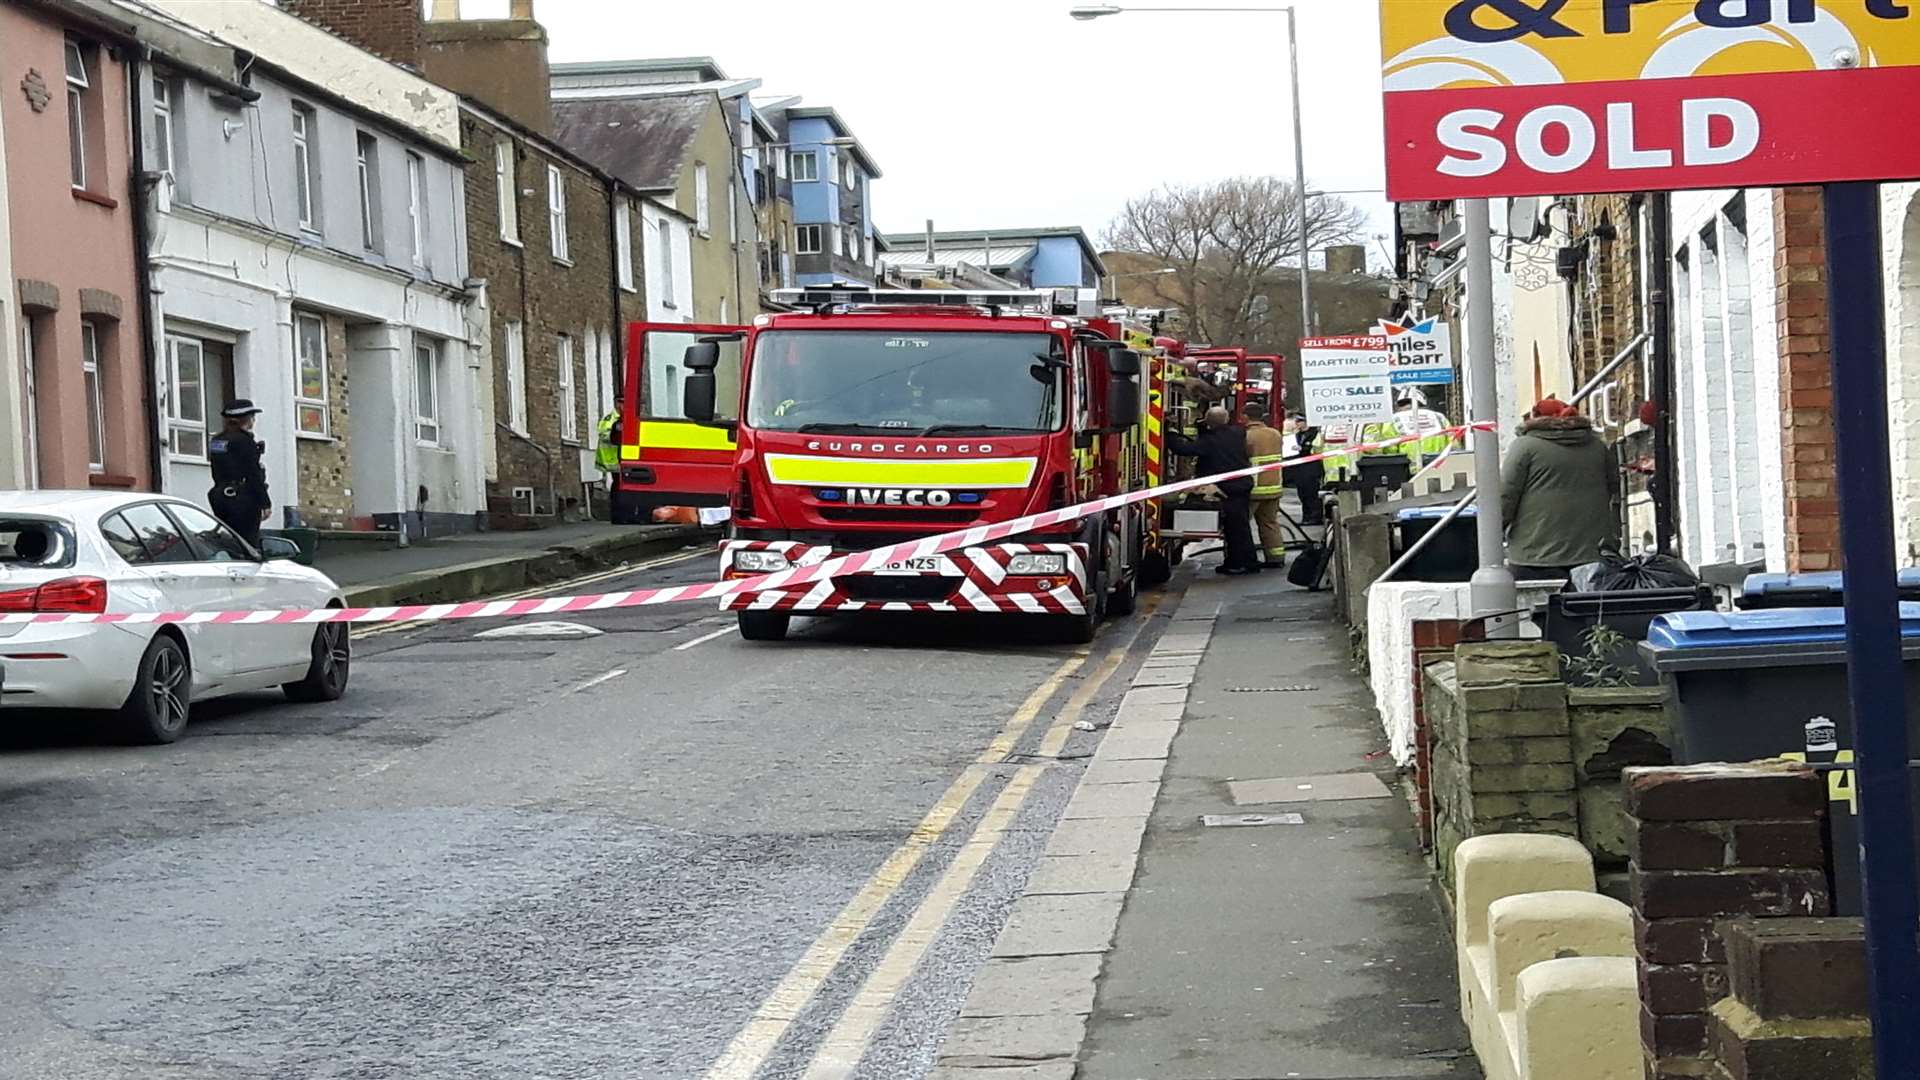 Emergency services at the house fire scene at Tower Street, Dover